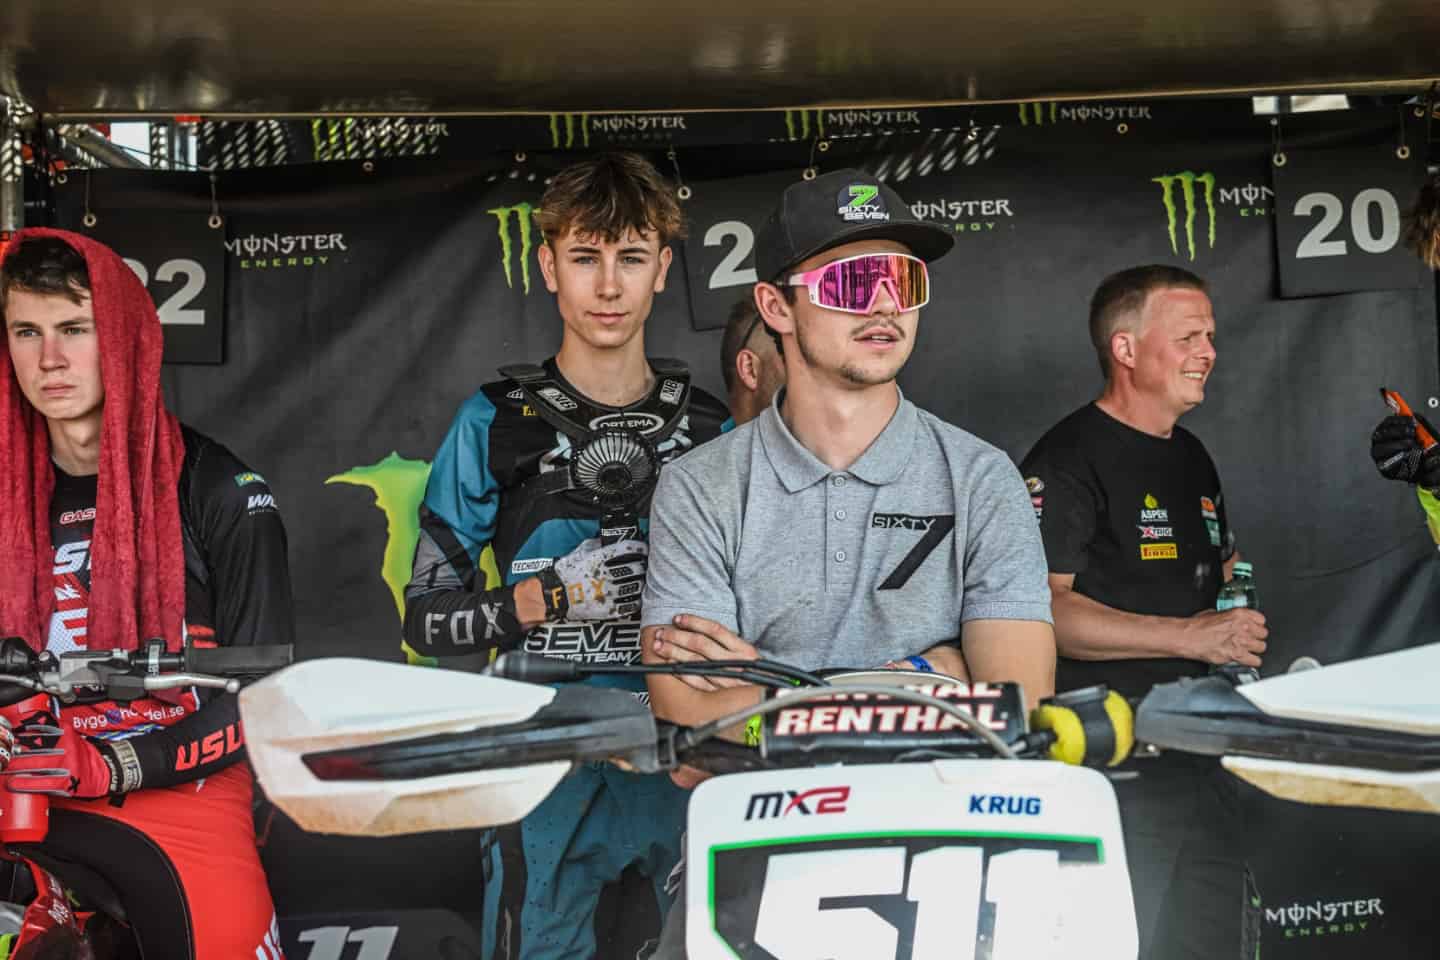 PM Team SixtySeven - MXGP of Germany